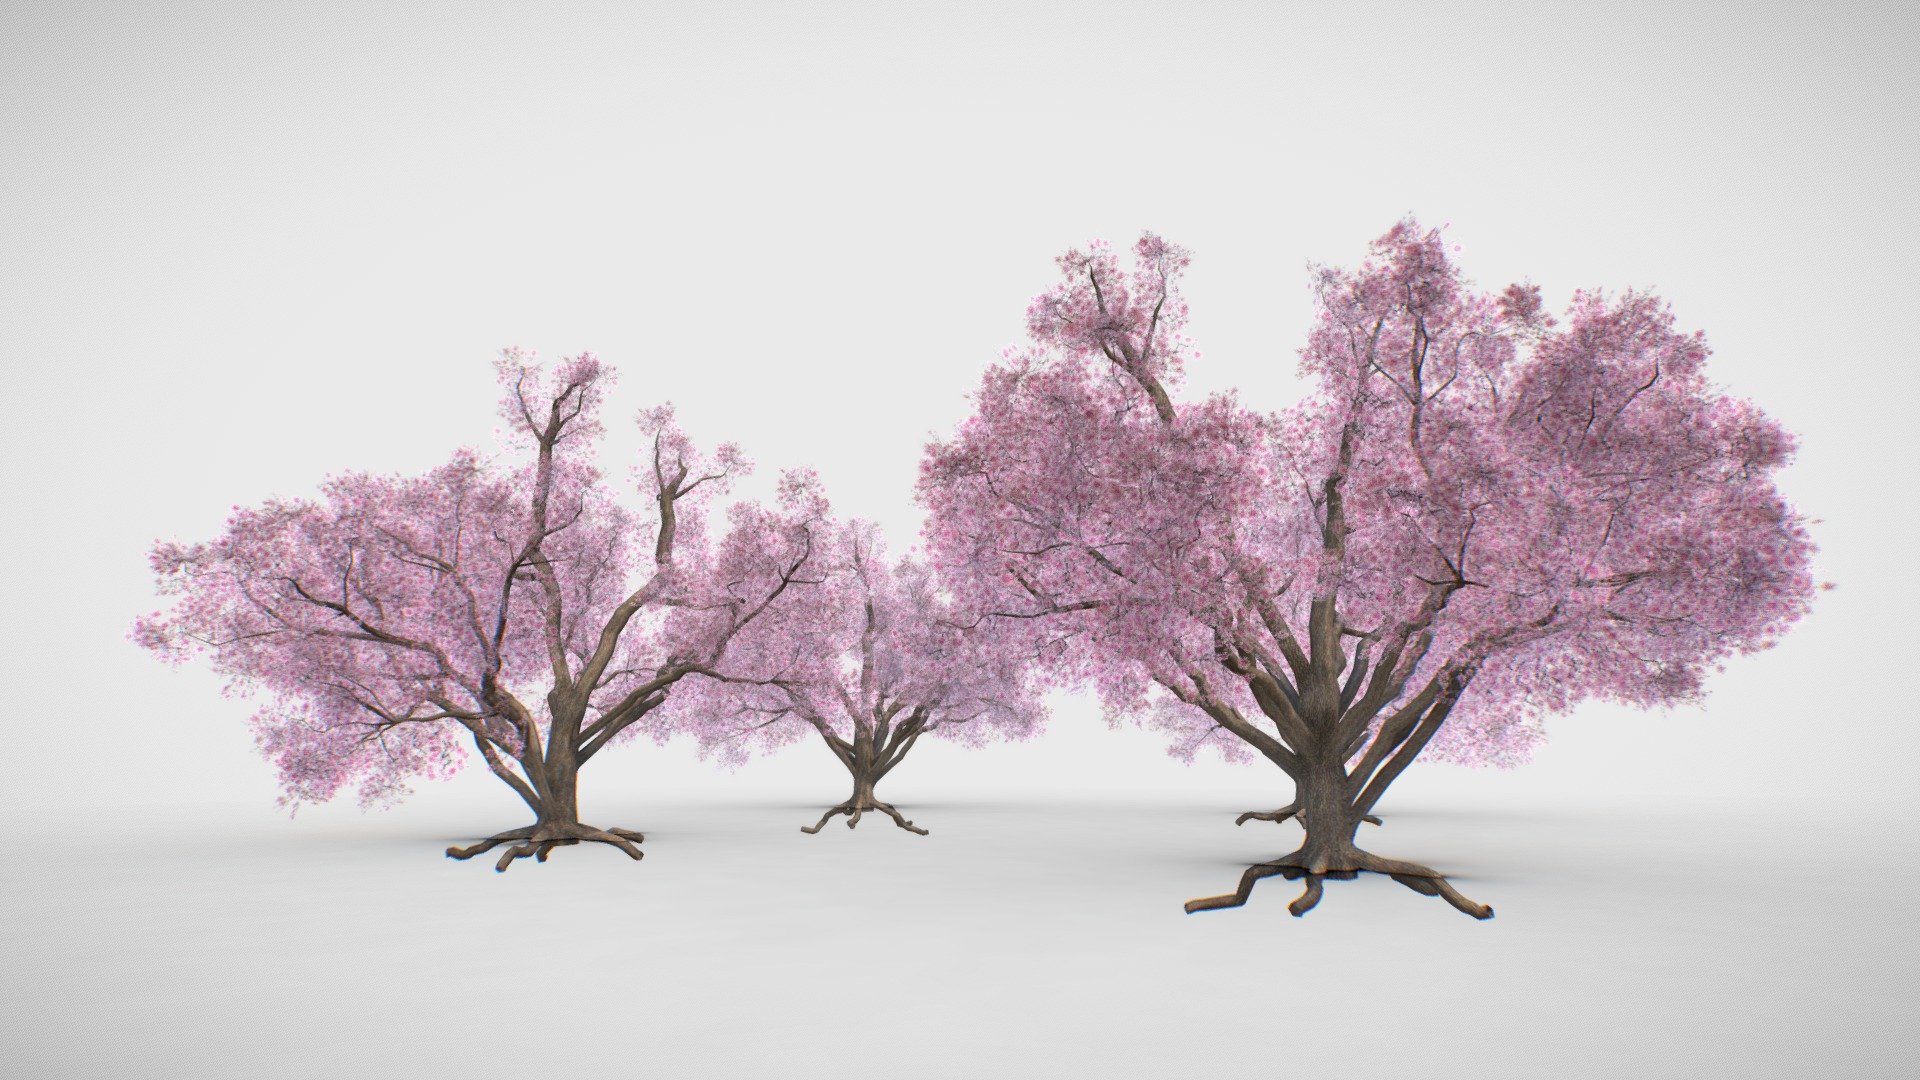 Blossom tree Sakura  ( Cherry ) 4 versions
About 2mb 1 tree

! Restricted to resell or reshare models after purchasing
After purchasing a 3D model, it will be available for download WITHOUT WATERMARKS in various 3D formats:
Blender 3.5 / Obj / Glb / Fbx / Dae / 3dsmax  - attached as an additional zip archive.
Any questions: sketchfab.vra@gmail.com - Blossom tree Sakura  ( Cherry ) 4 versions UPD - Buy Royalty Free 3D model by VRA (@architect47) 3d model